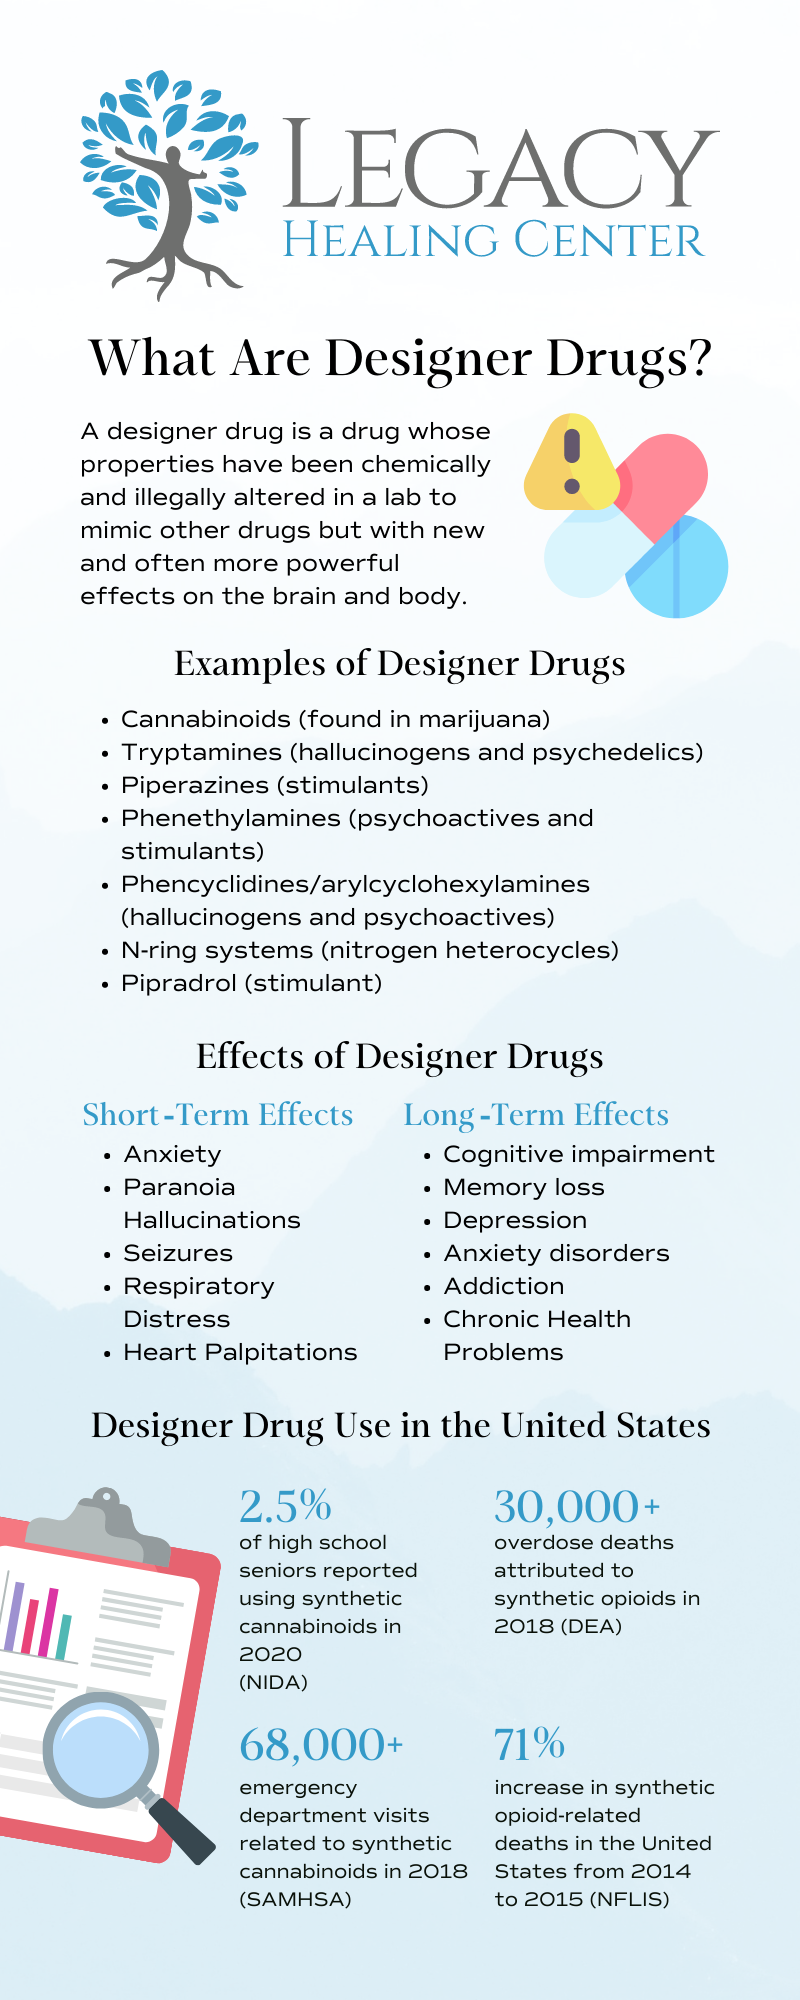 What Are Designer Drugs and How Dangerous Are They?